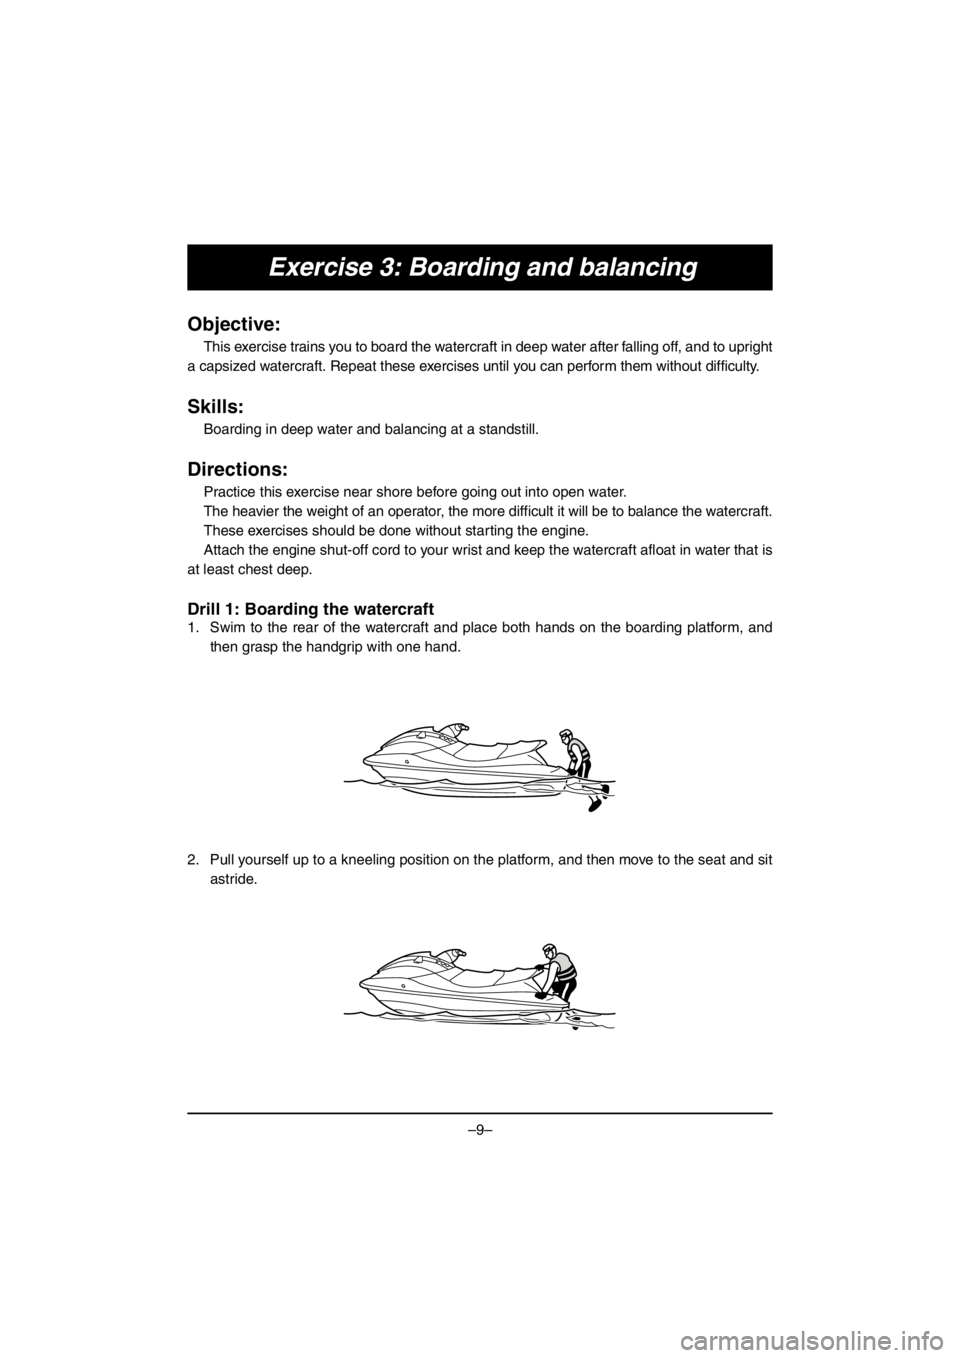 YAMAHA V1 2016  Owners Manual –9–
Exercise 3: Boarding and balancing
Objective:
This exercise trains you to board the watercraft in deep water after falling off, and to upright
a capsized watercraft. Repeat these exercises unt